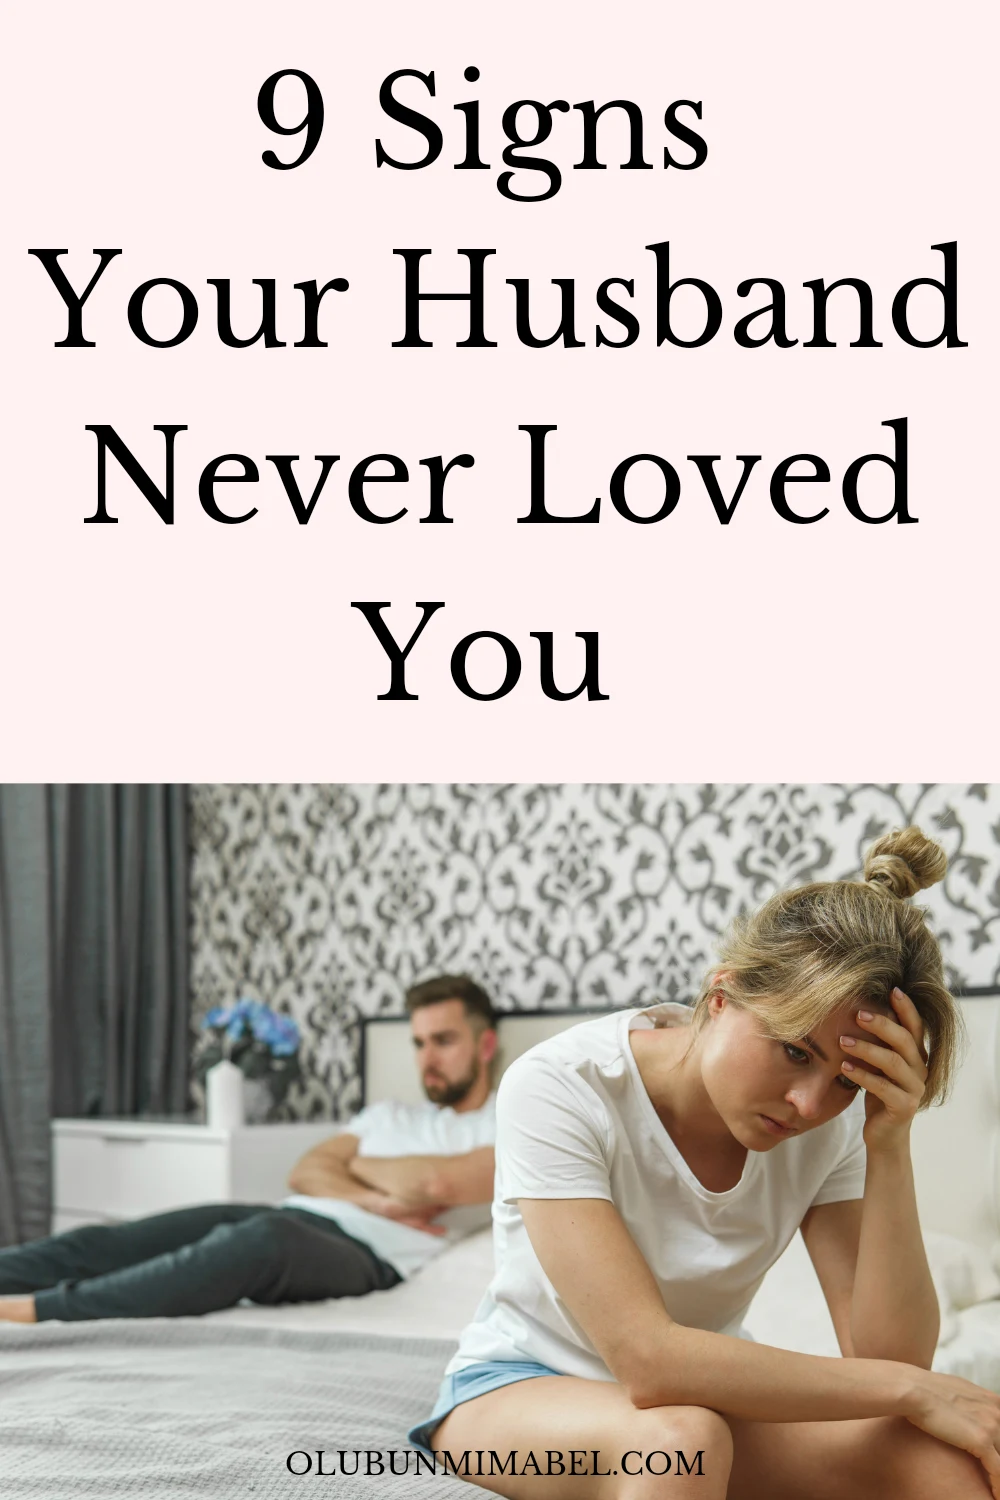 Signs Your Husband Never Loved You